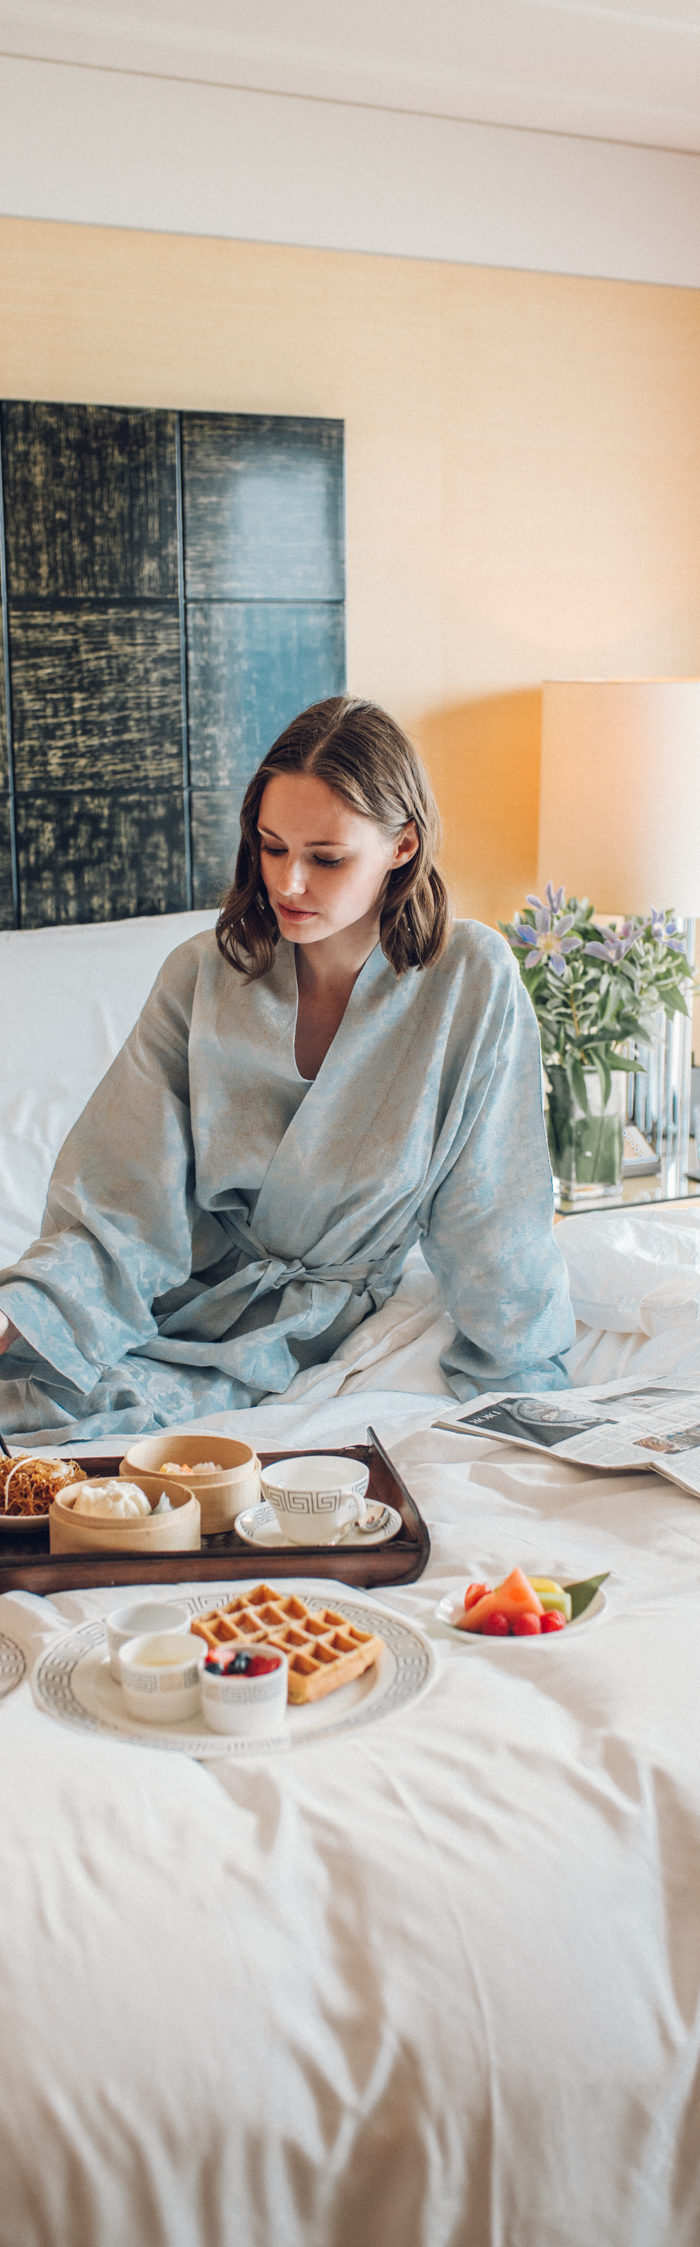 Miss USA 2011 Alyssa Campanella of The A List blog visits Mandarin Oriental Hong Kong and has breakfast in bed in the Meiji Suite